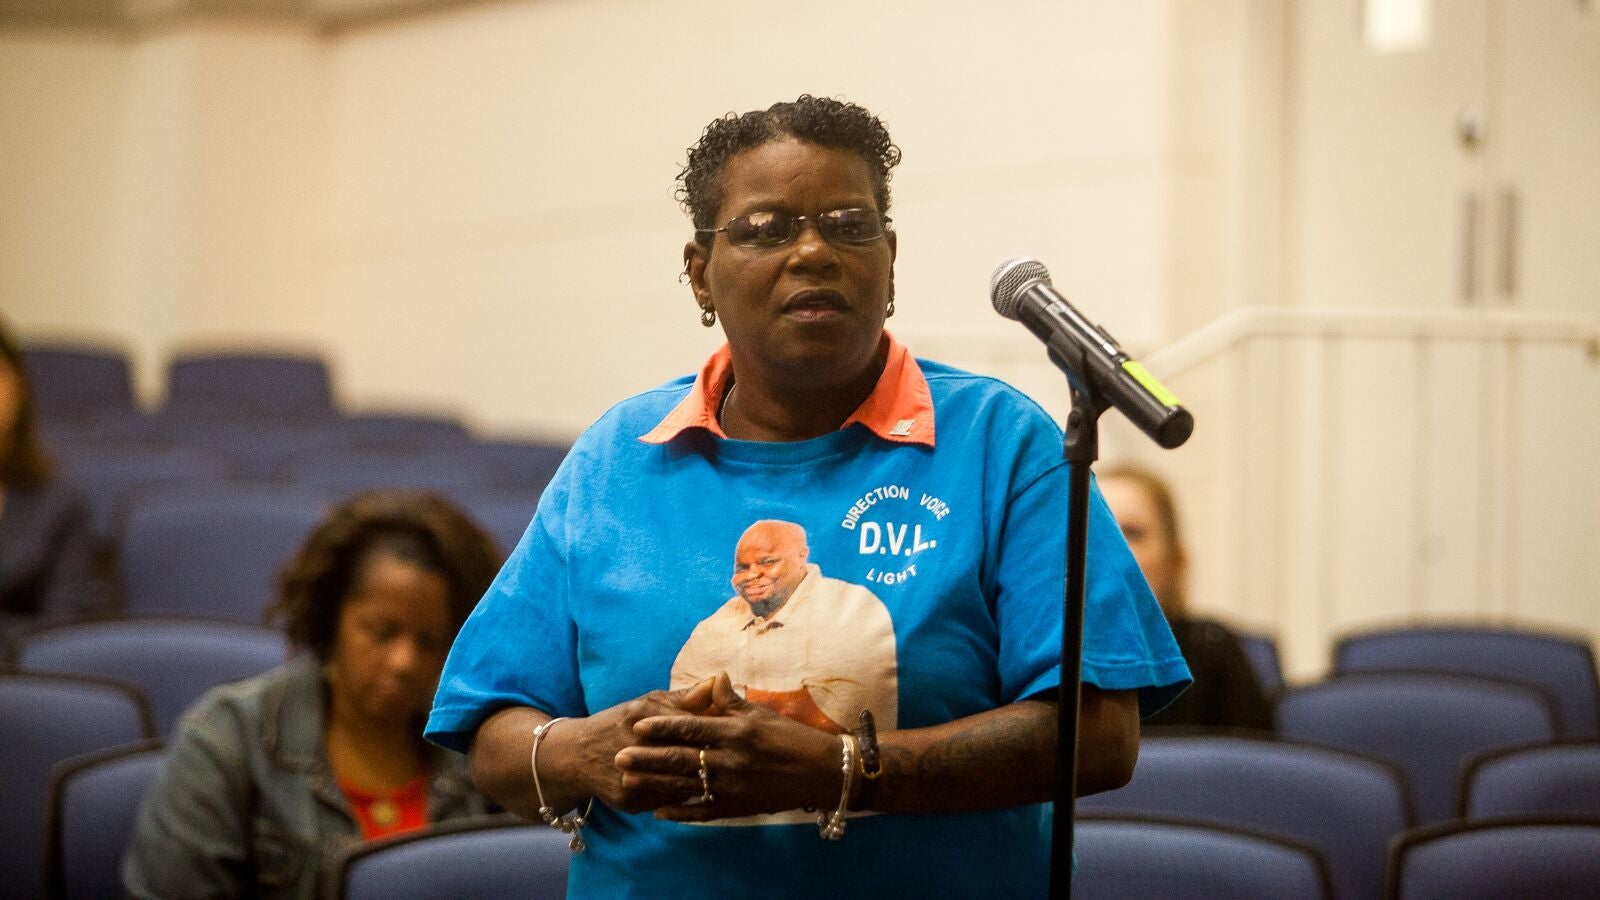 Delphine Matthews speaks at a listening session between the DOJ and residents of Chester. On her shirt is a picture of her son